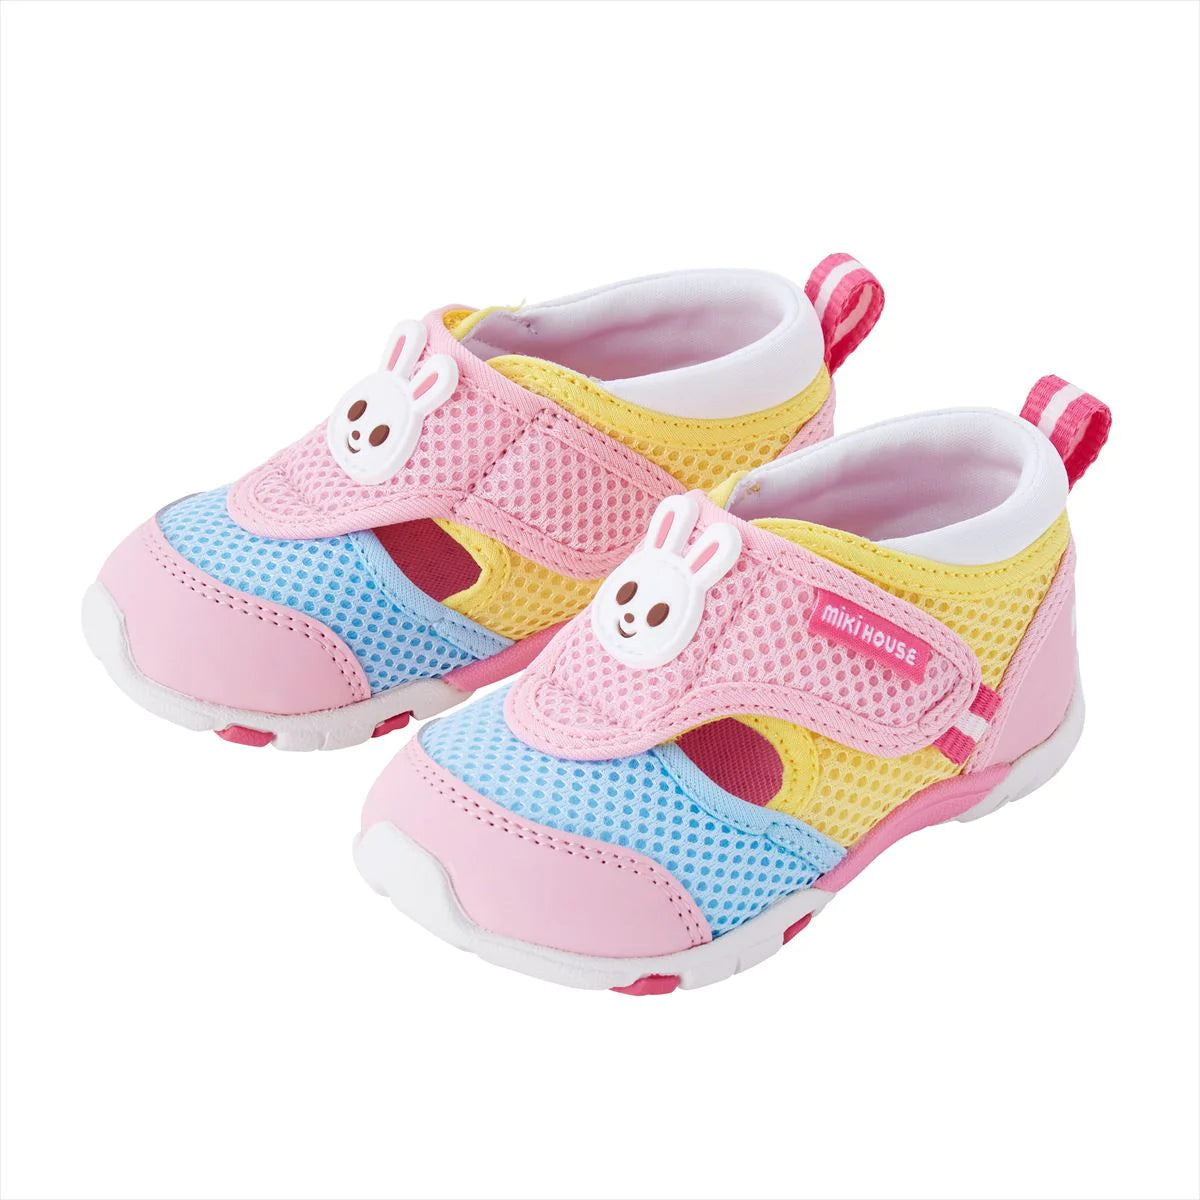 Double Russell Sneakers for Kids - Power Pop